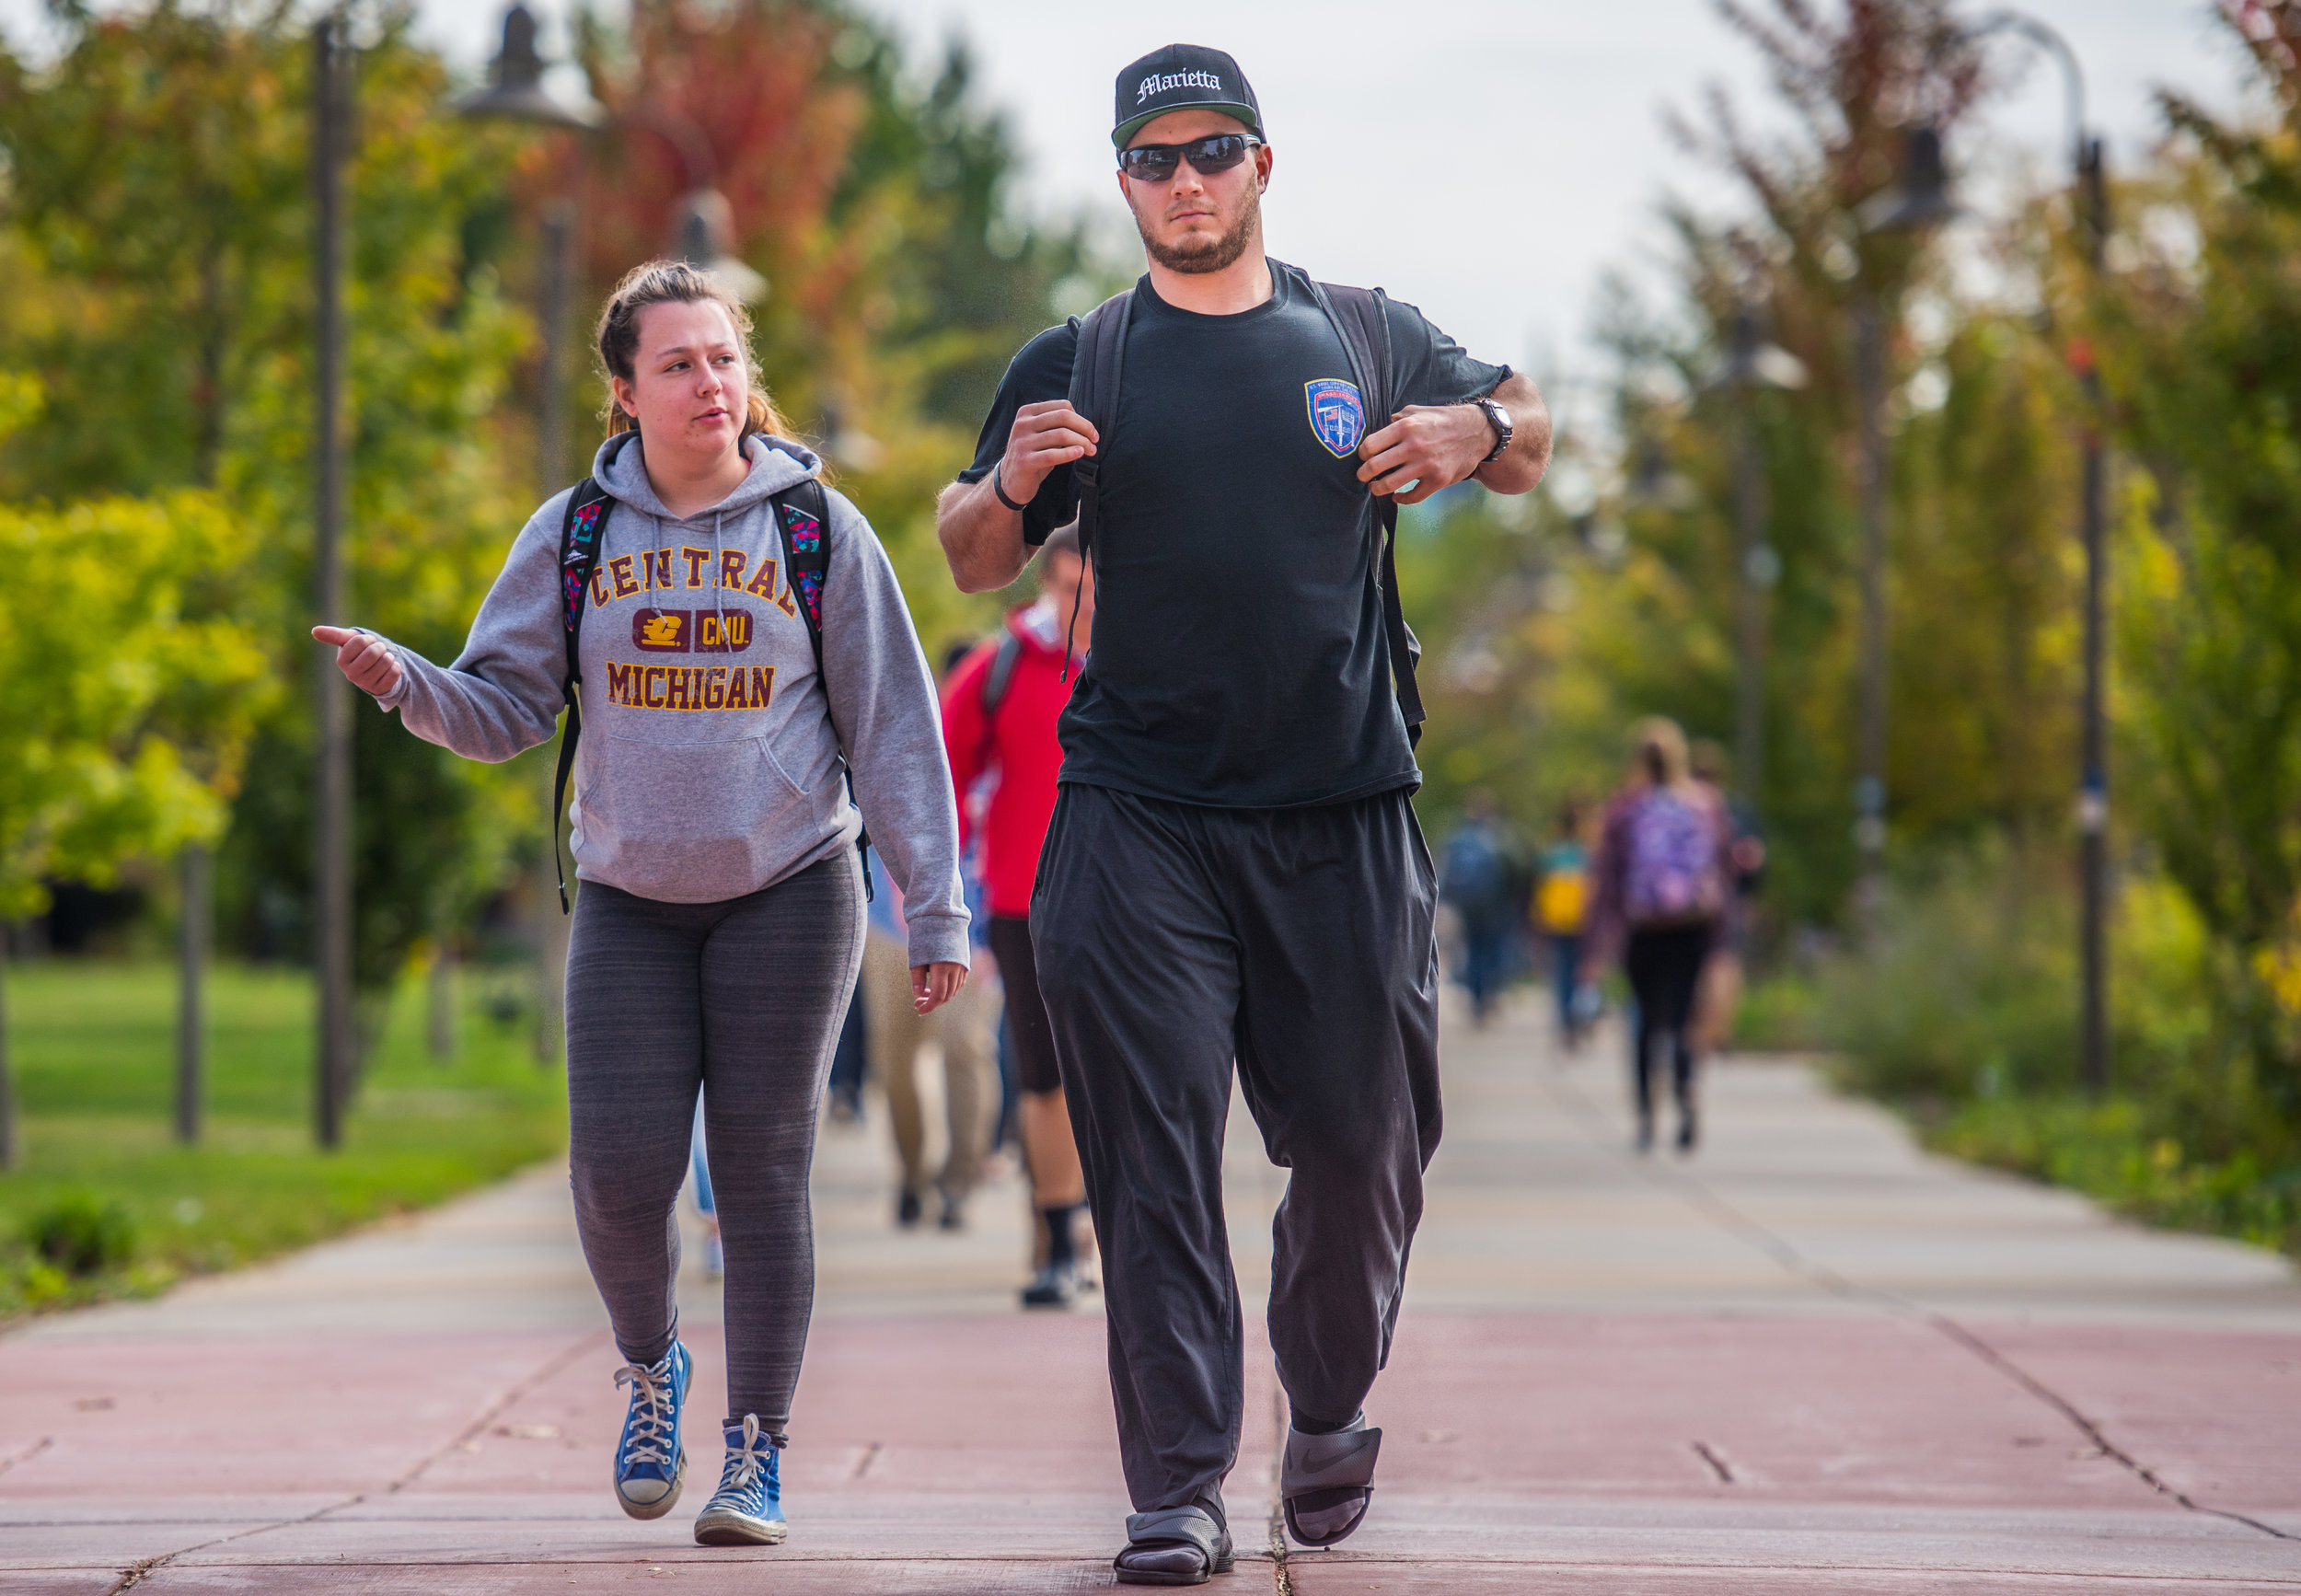  Brett and Alexis walk through the campus of Central Michigan University, Oct. 10 in Mount Pleasant, Michigan. They're both seniors and plan to attend graduate school after this year. Brett majors in Social and Criminal Justice and Alexis majors in P